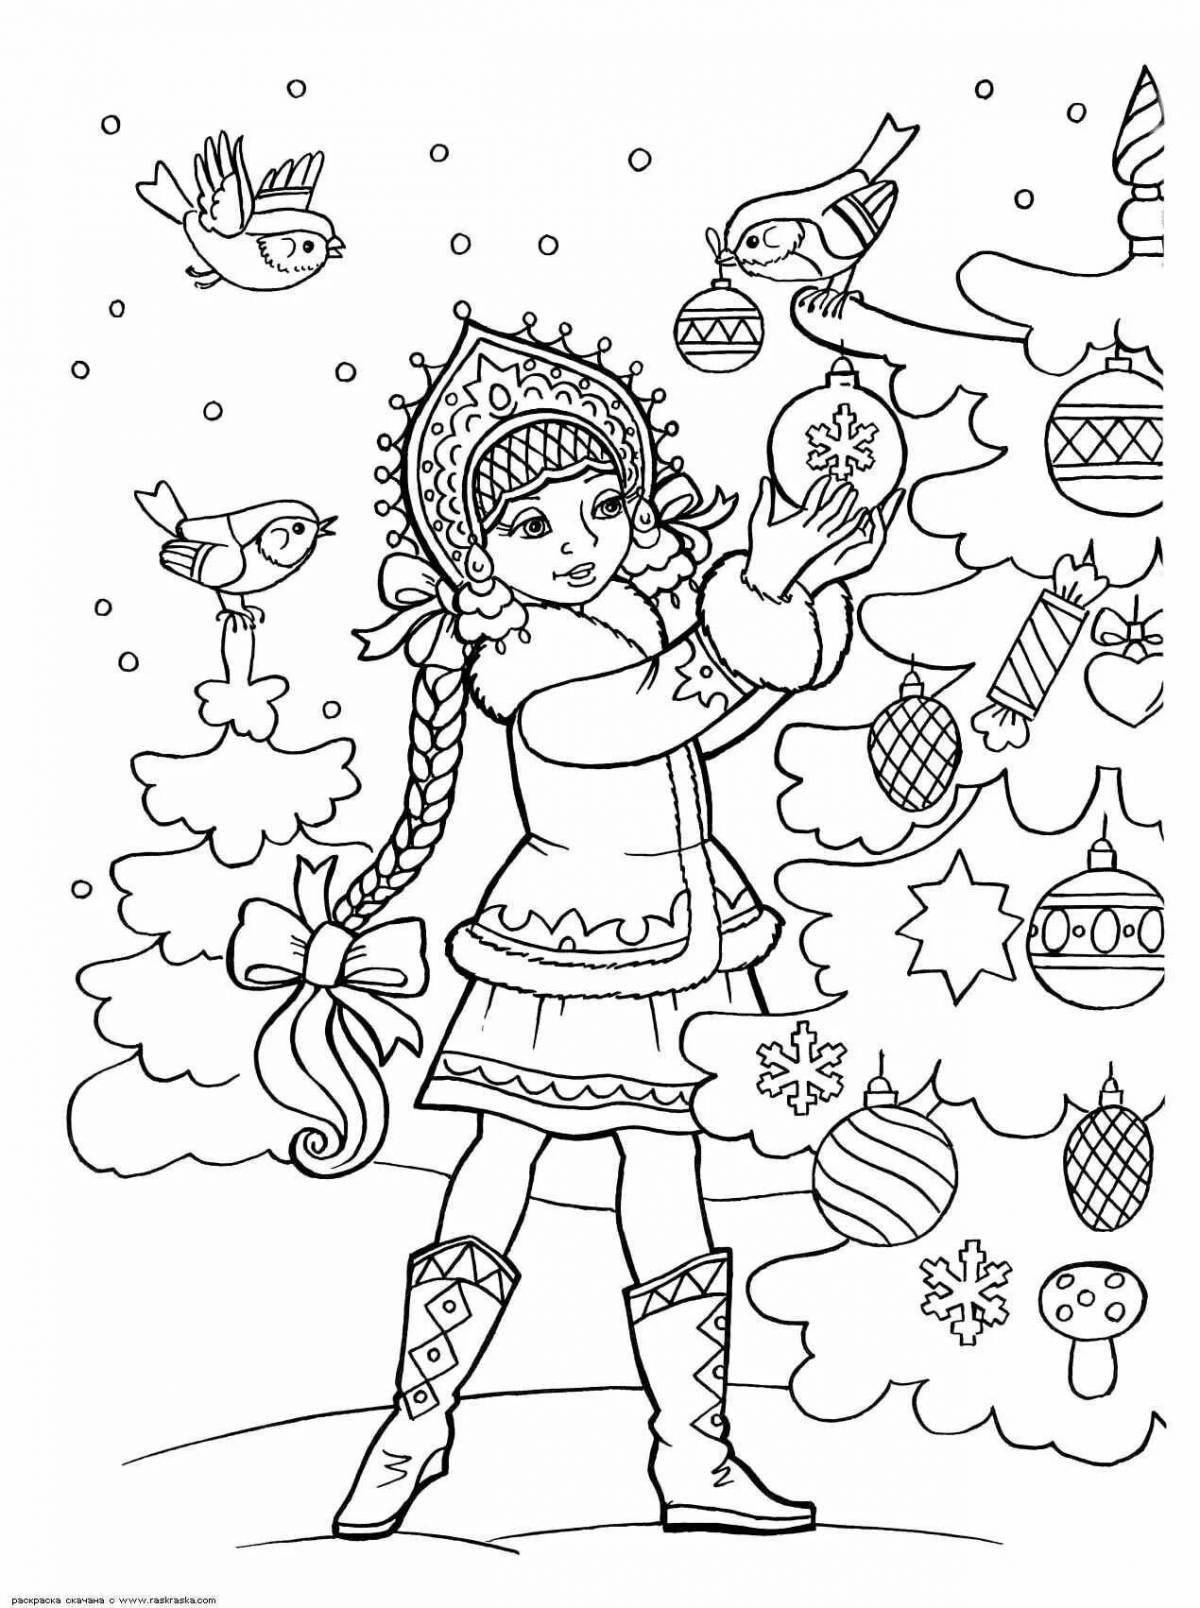 Amazing Christmas coloring book for kids 6-7 years old